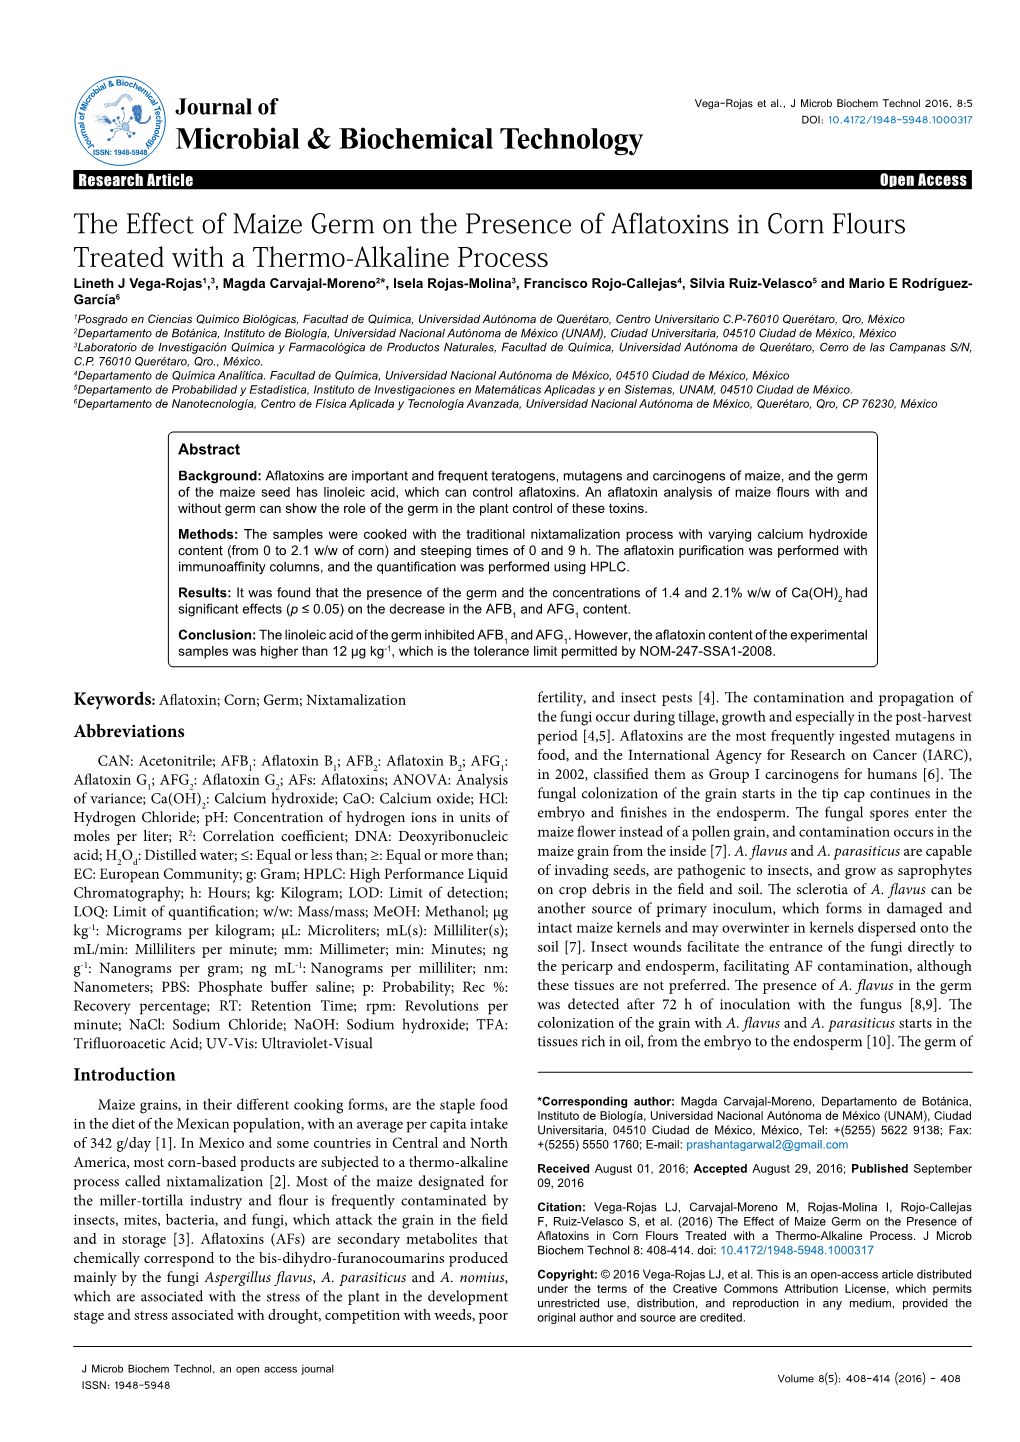 The Effect of Maize Germ on the Presence of Aflatoxins in Corn